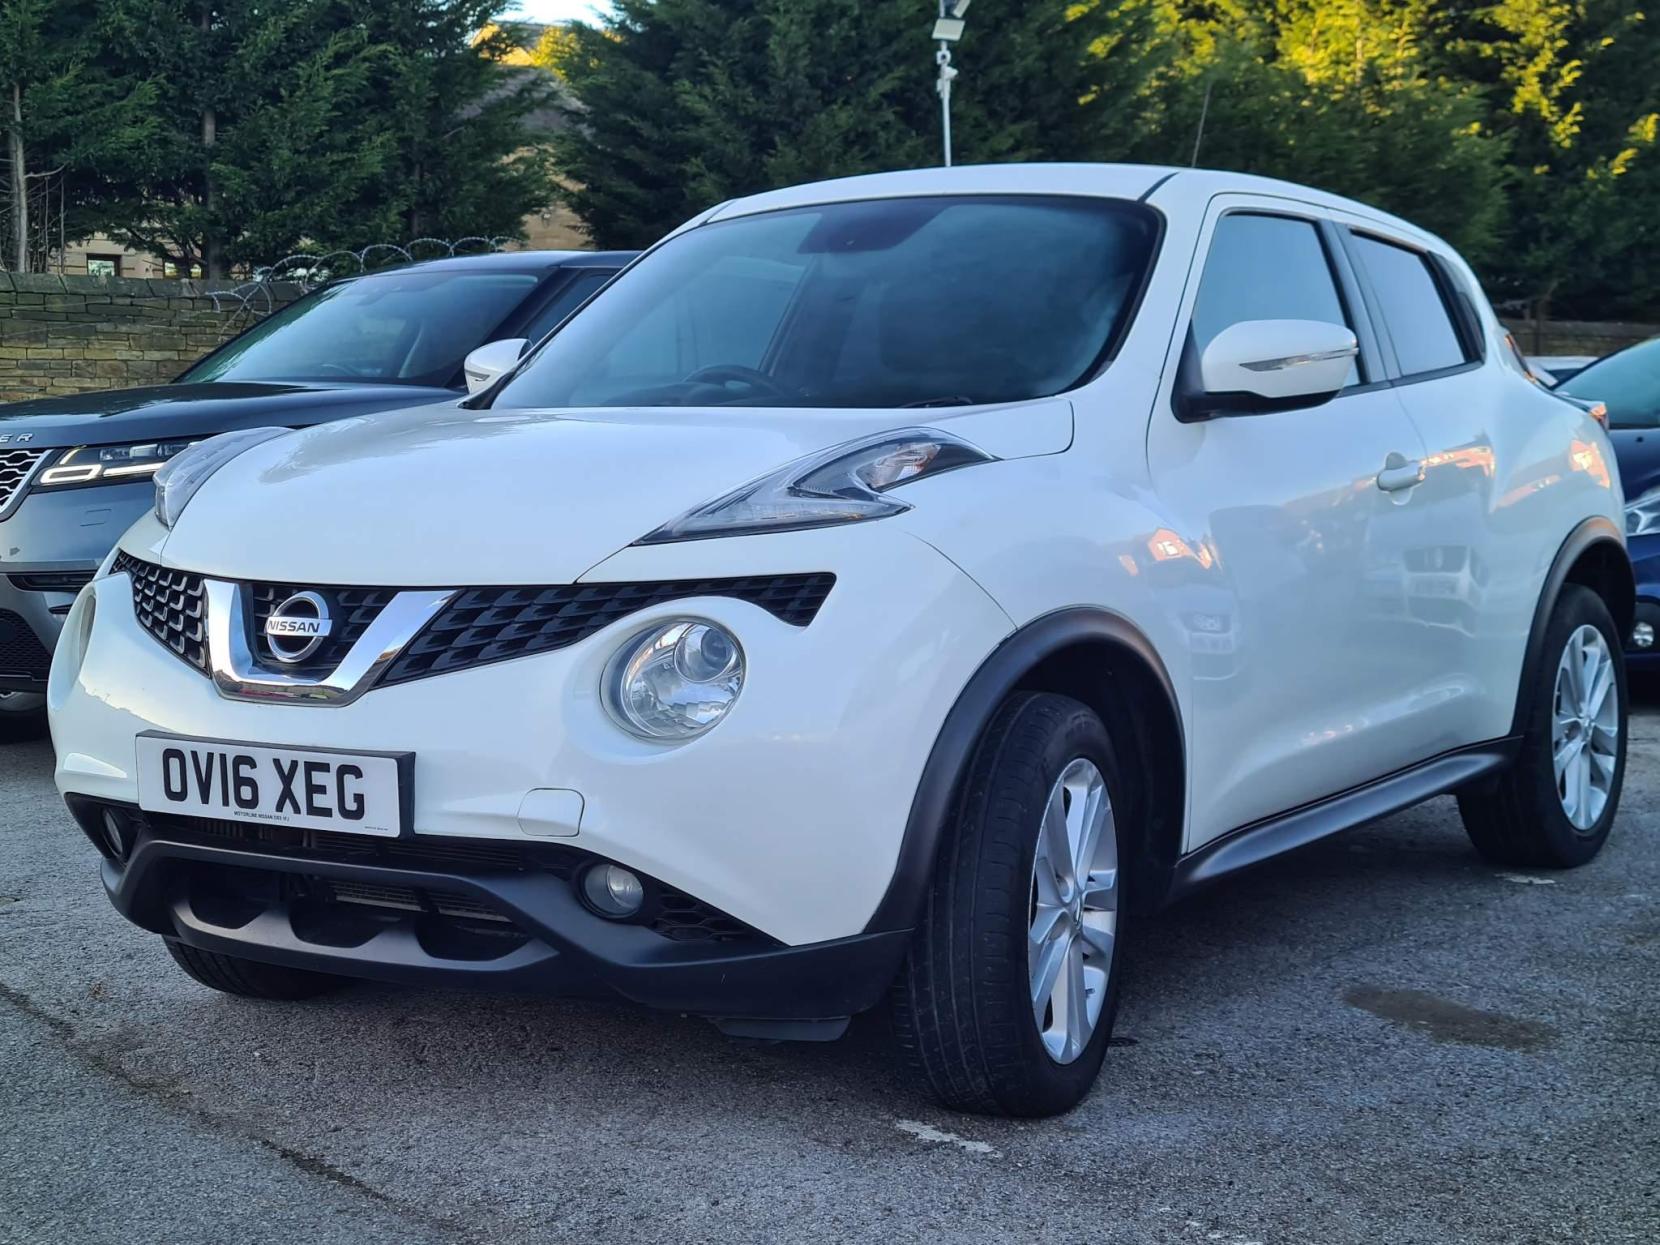 Nissan Juke 1.5 dCi N-Connecta Euro 6 (s/s) 5dr